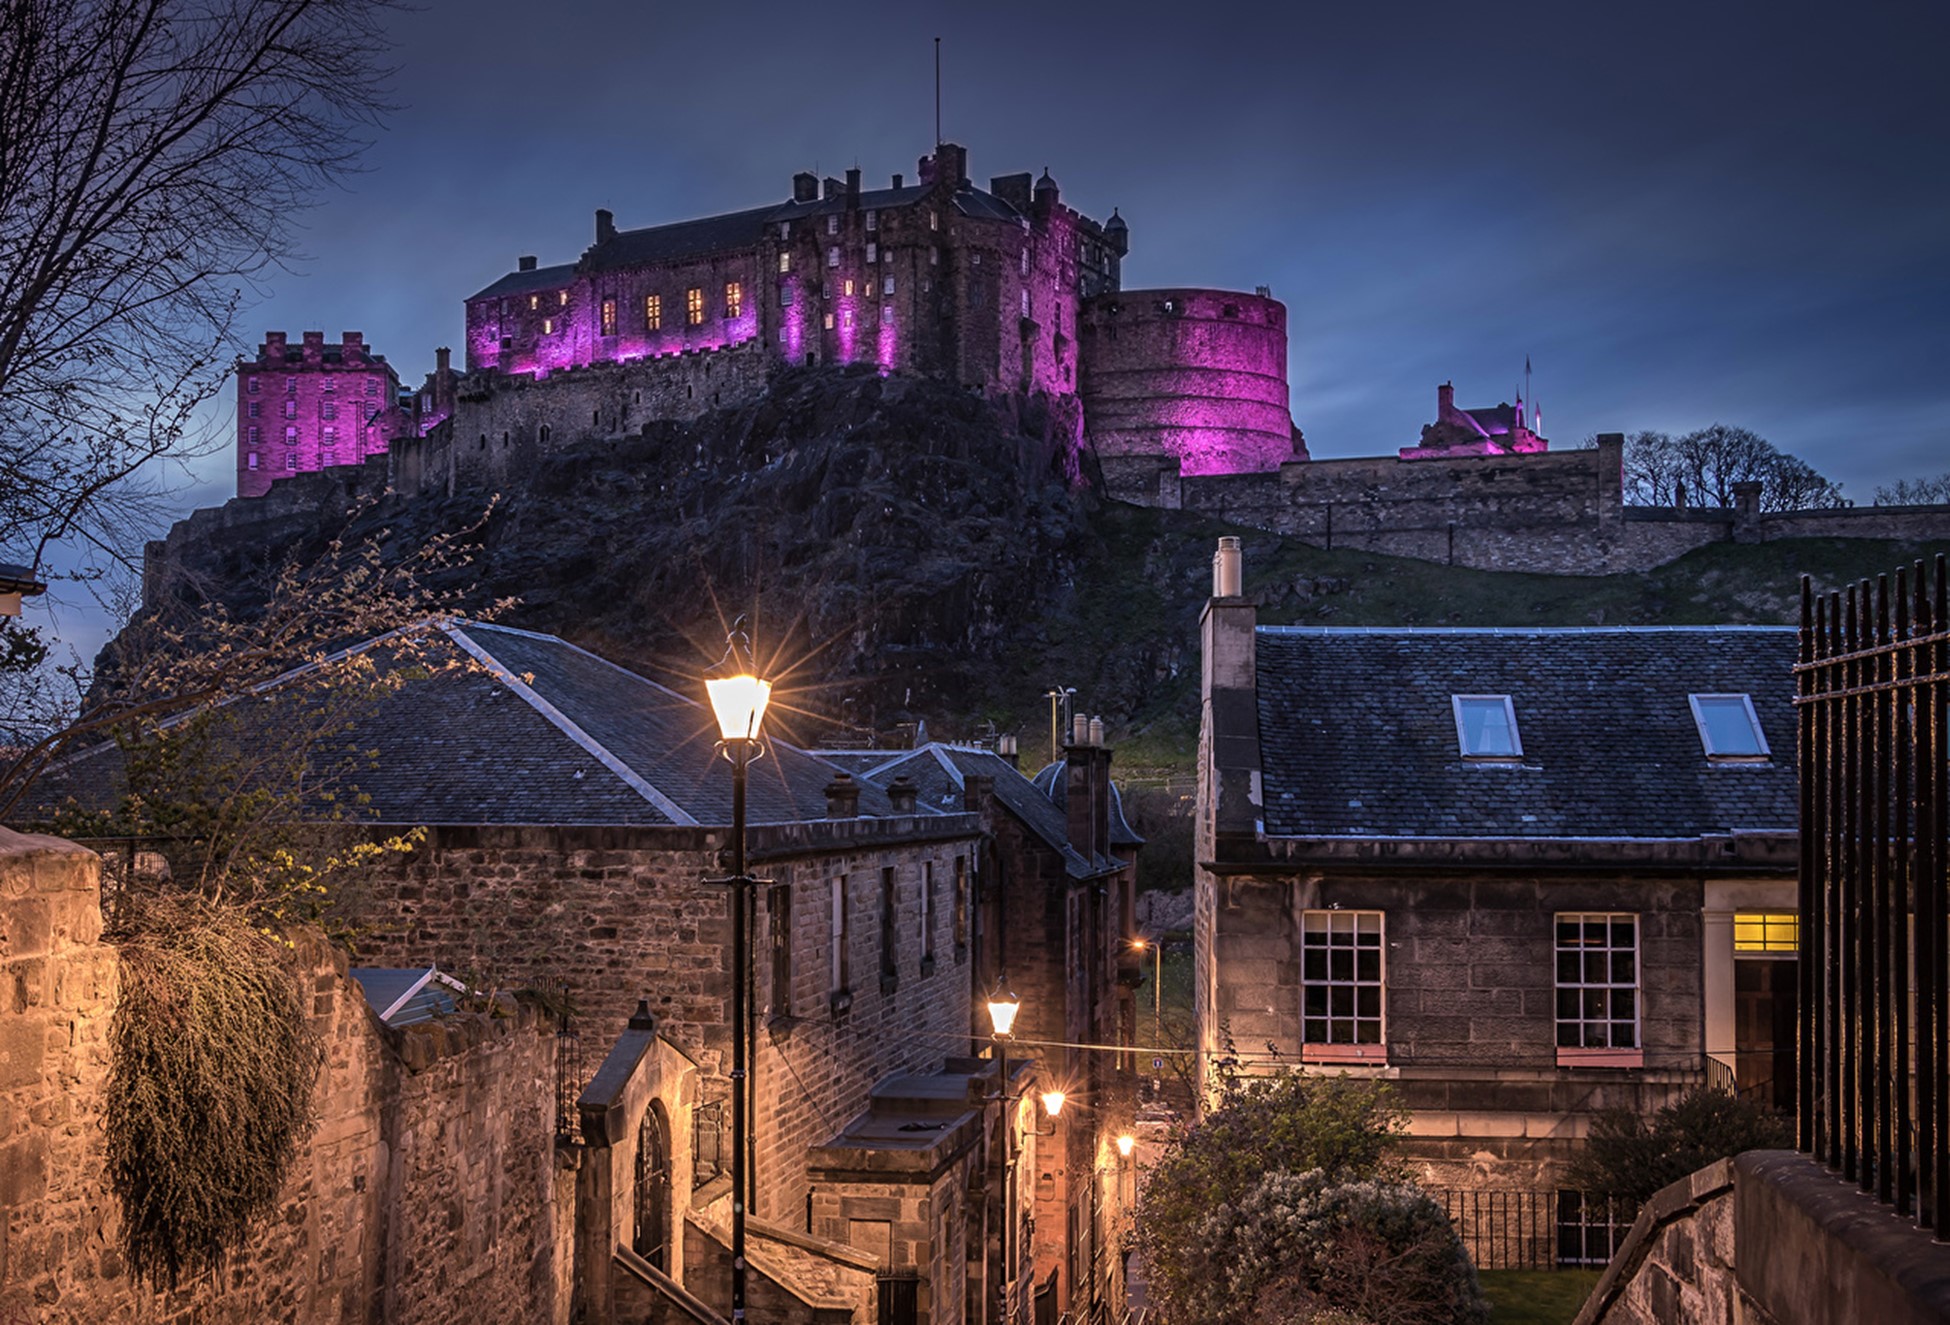 A beautiful and warm rendition of Edinburgh’s borough streets in the evening overlooking the captivating view of the historic castle. This continues to serve as a modern reminder of the country’s resilient and spirited past.